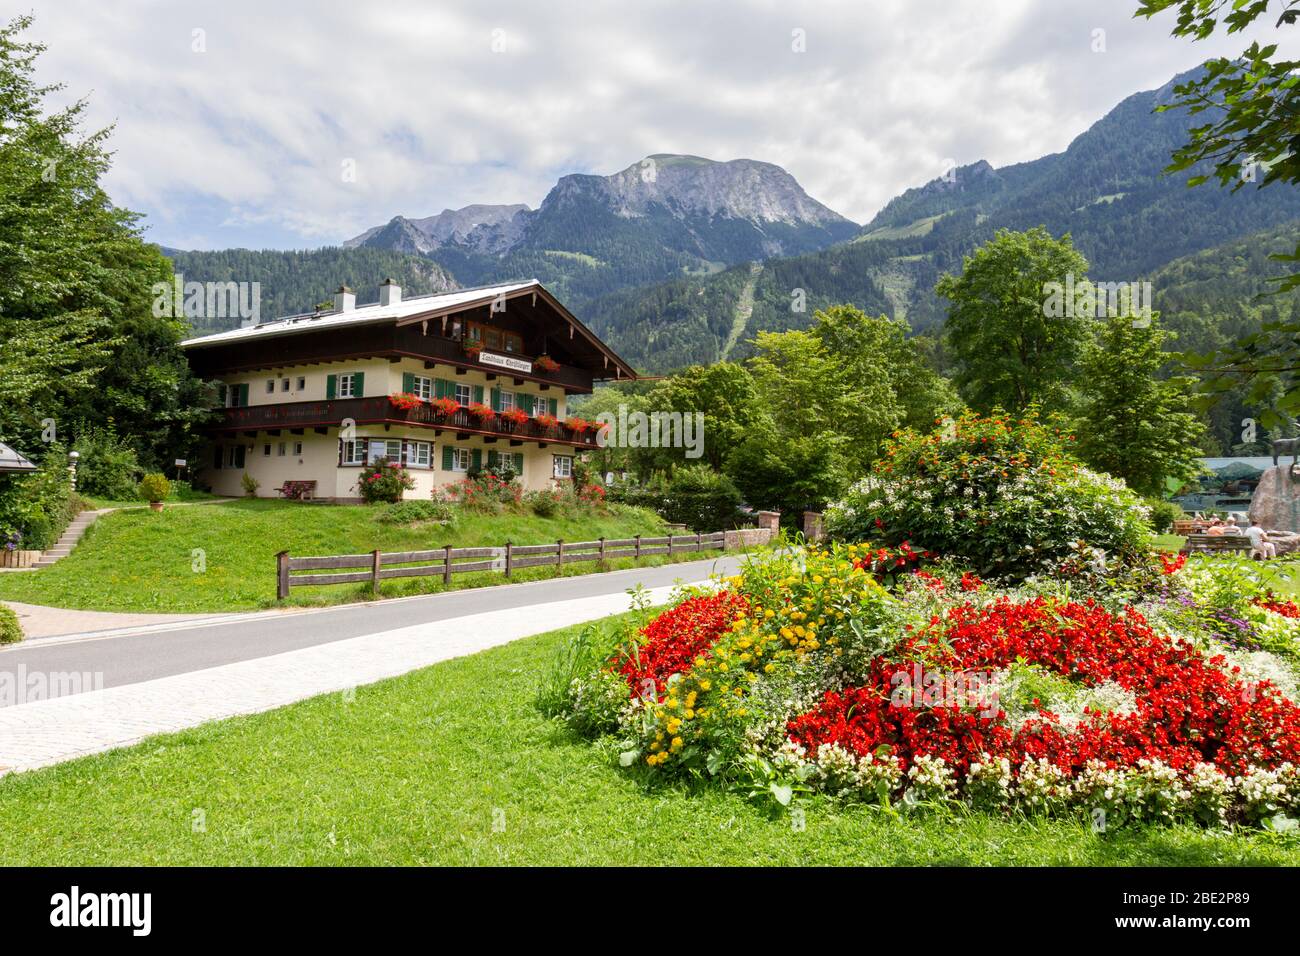 View of Landhaus Christlieger with mountains on German/Austrian border from town of Königssee, Bavaria, Germany. Stock Photo